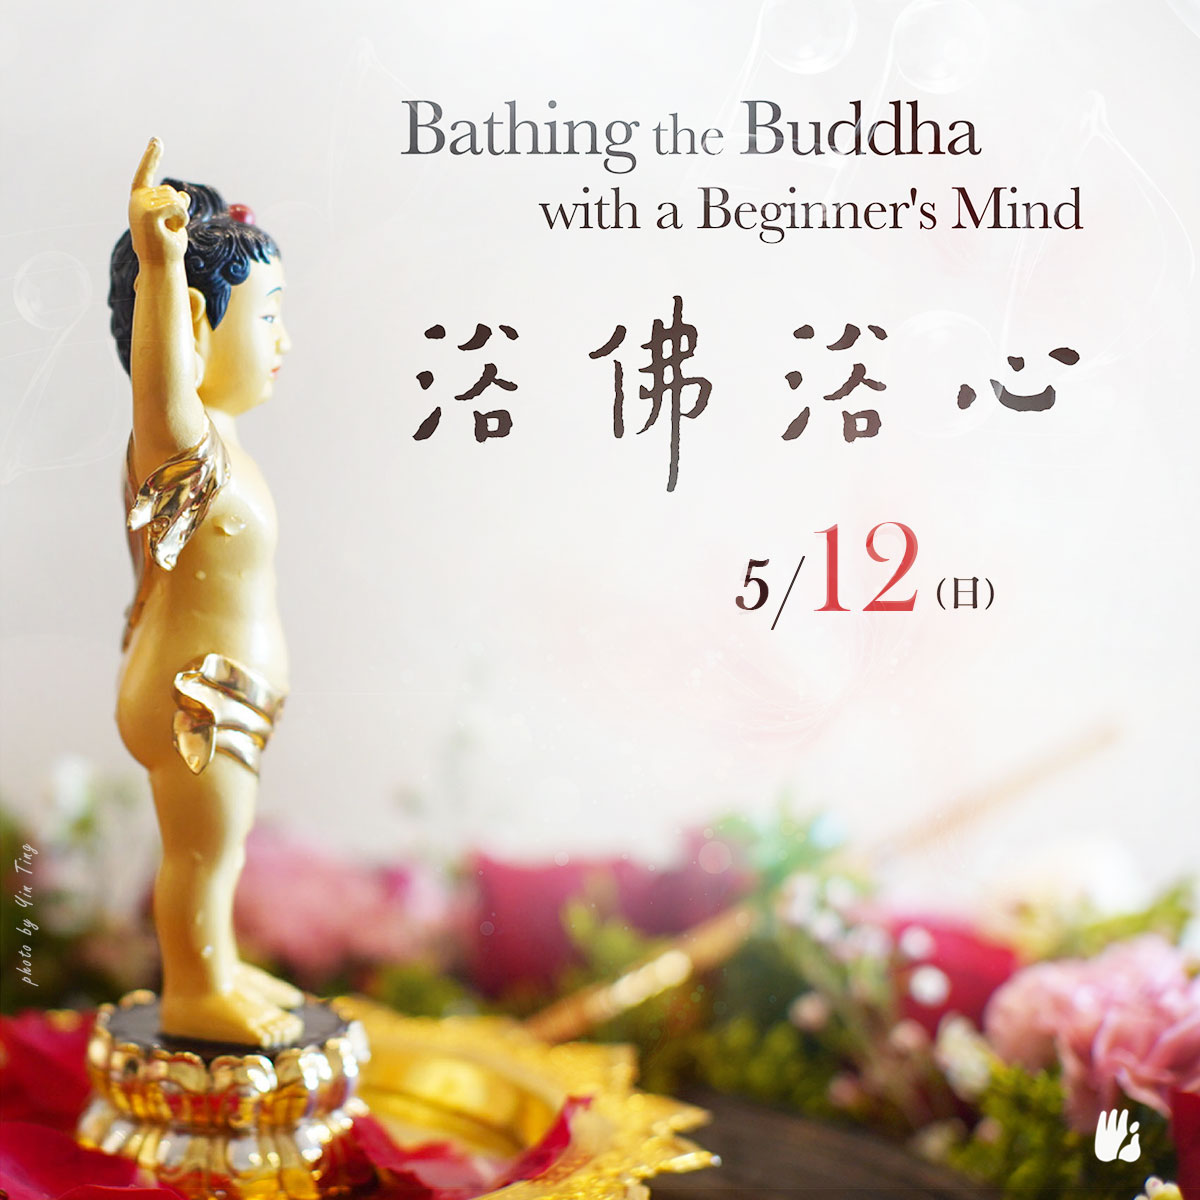 Bathing the Buddha with a Beginner’s Mind